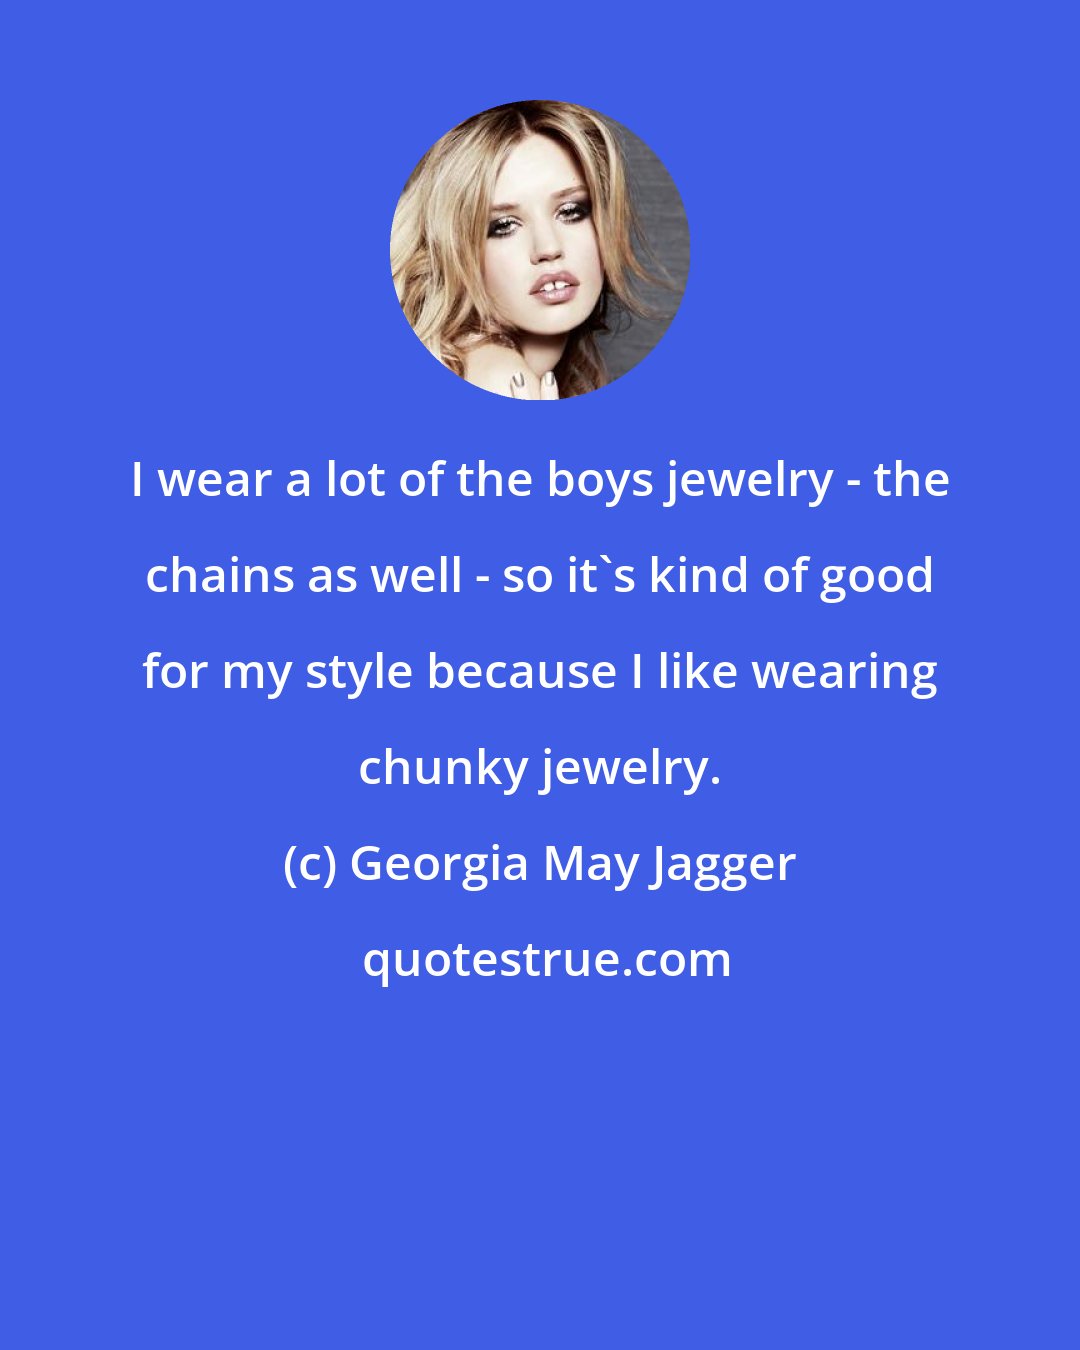 Georgia May Jagger: I wear a lot of the boys jewelry - the chains as well - so it's kind of good for my style because I like wearing chunky jewelry.